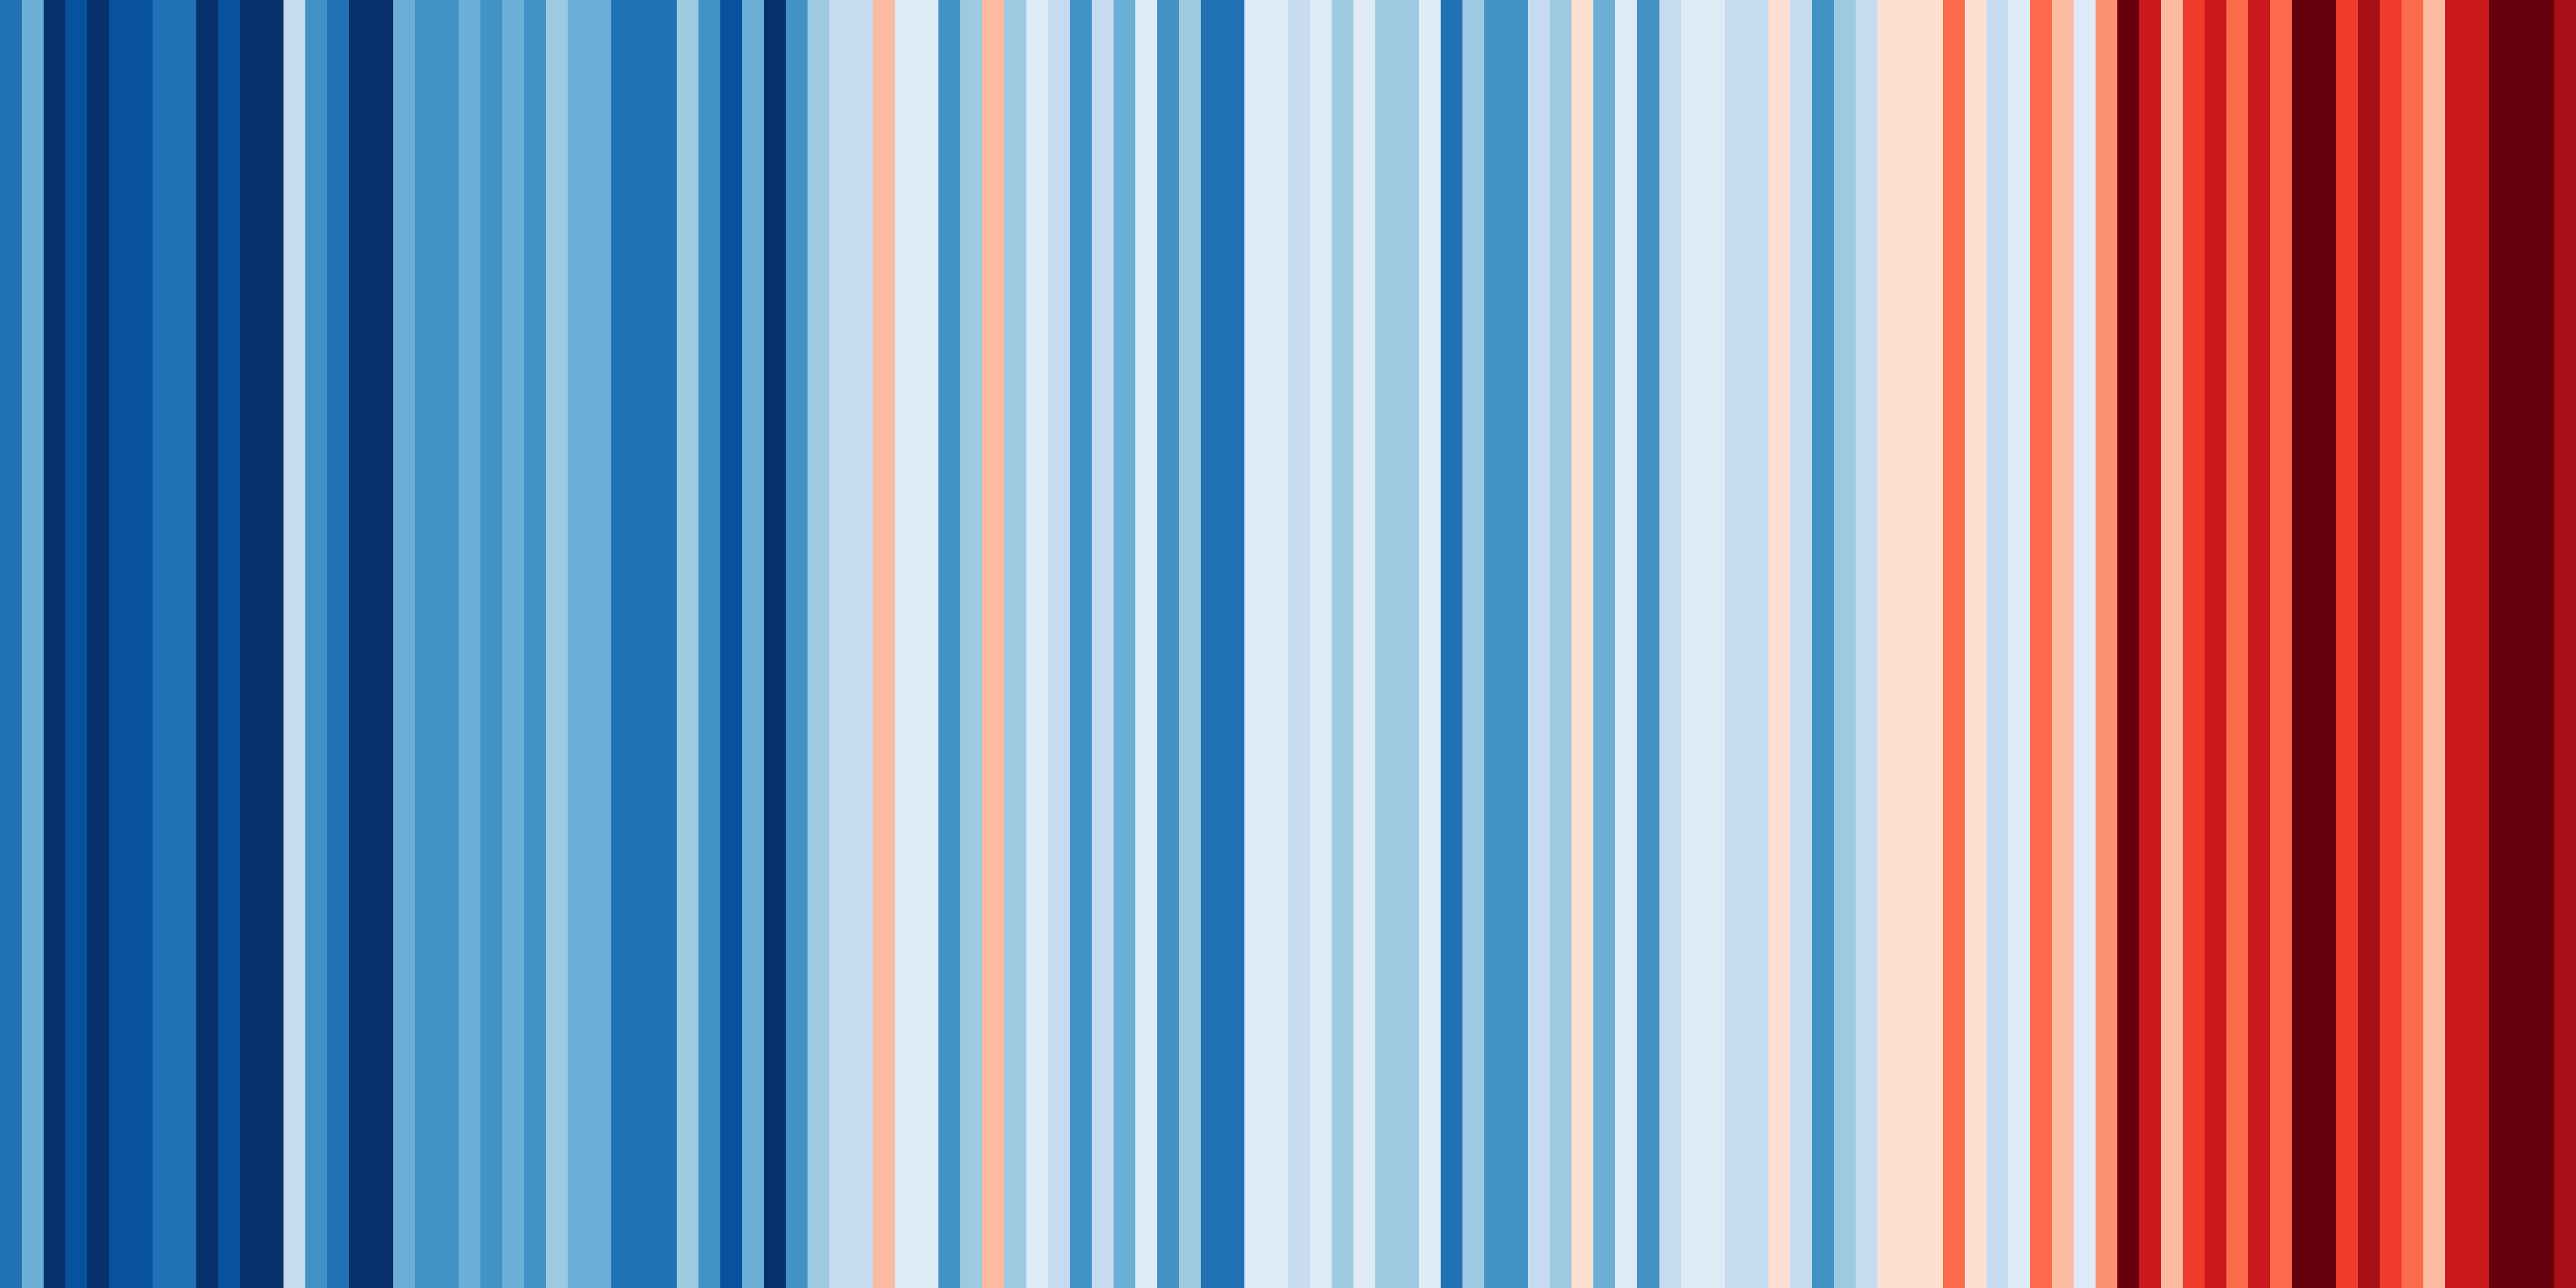 Warming stripes - Annual temperatures for China (1901-2018)